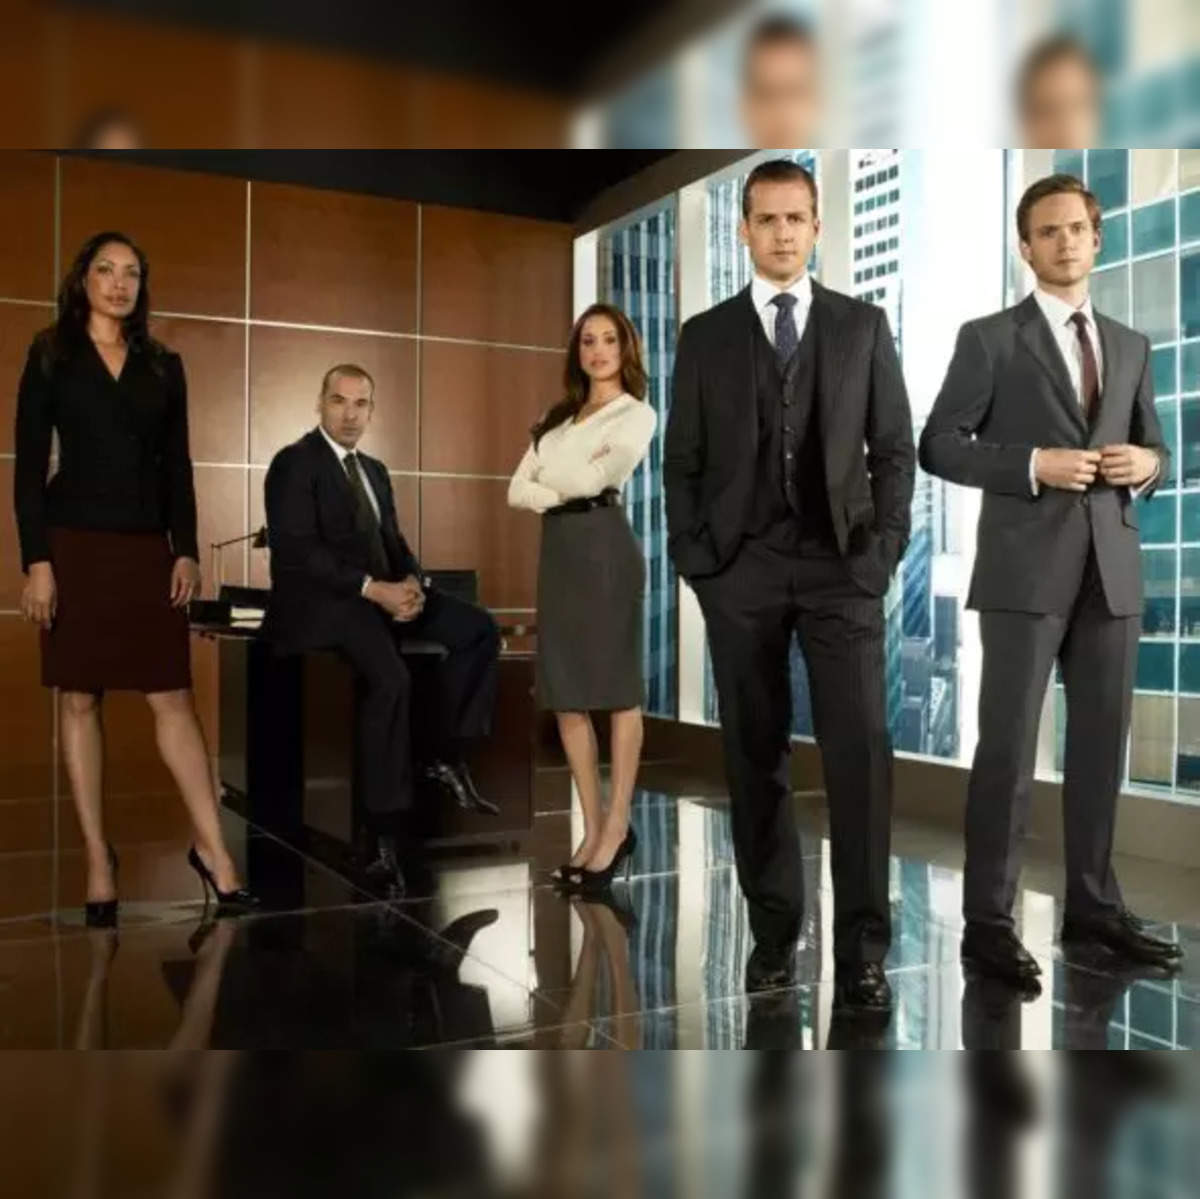 Like The Diplomat? Here are 10 TV shows just like it | Digital Trends